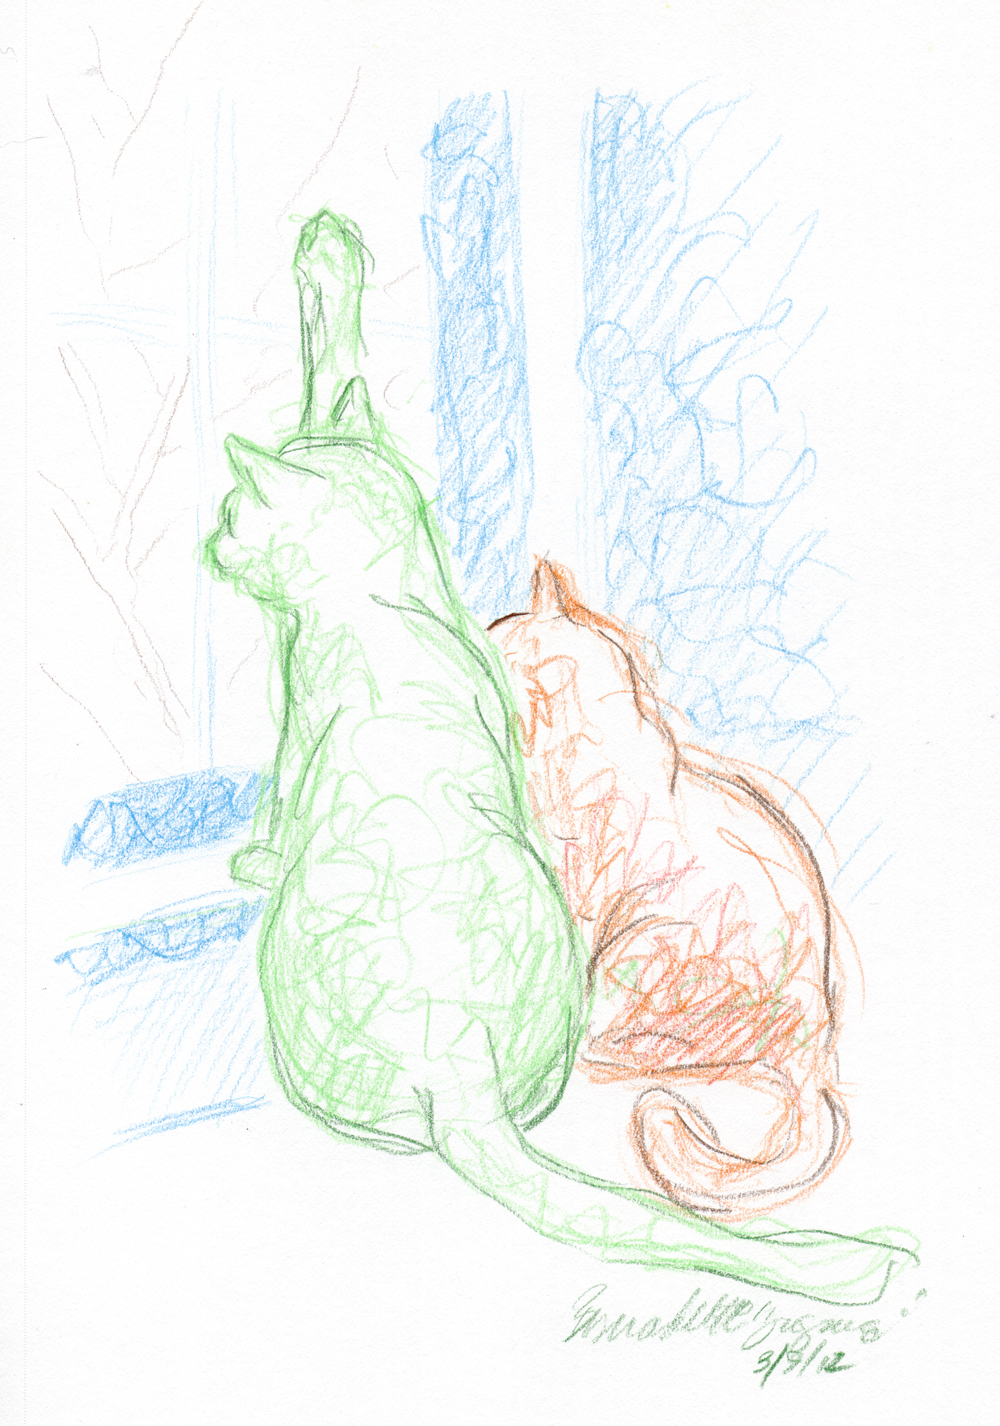 colore pencil drawing of two cats